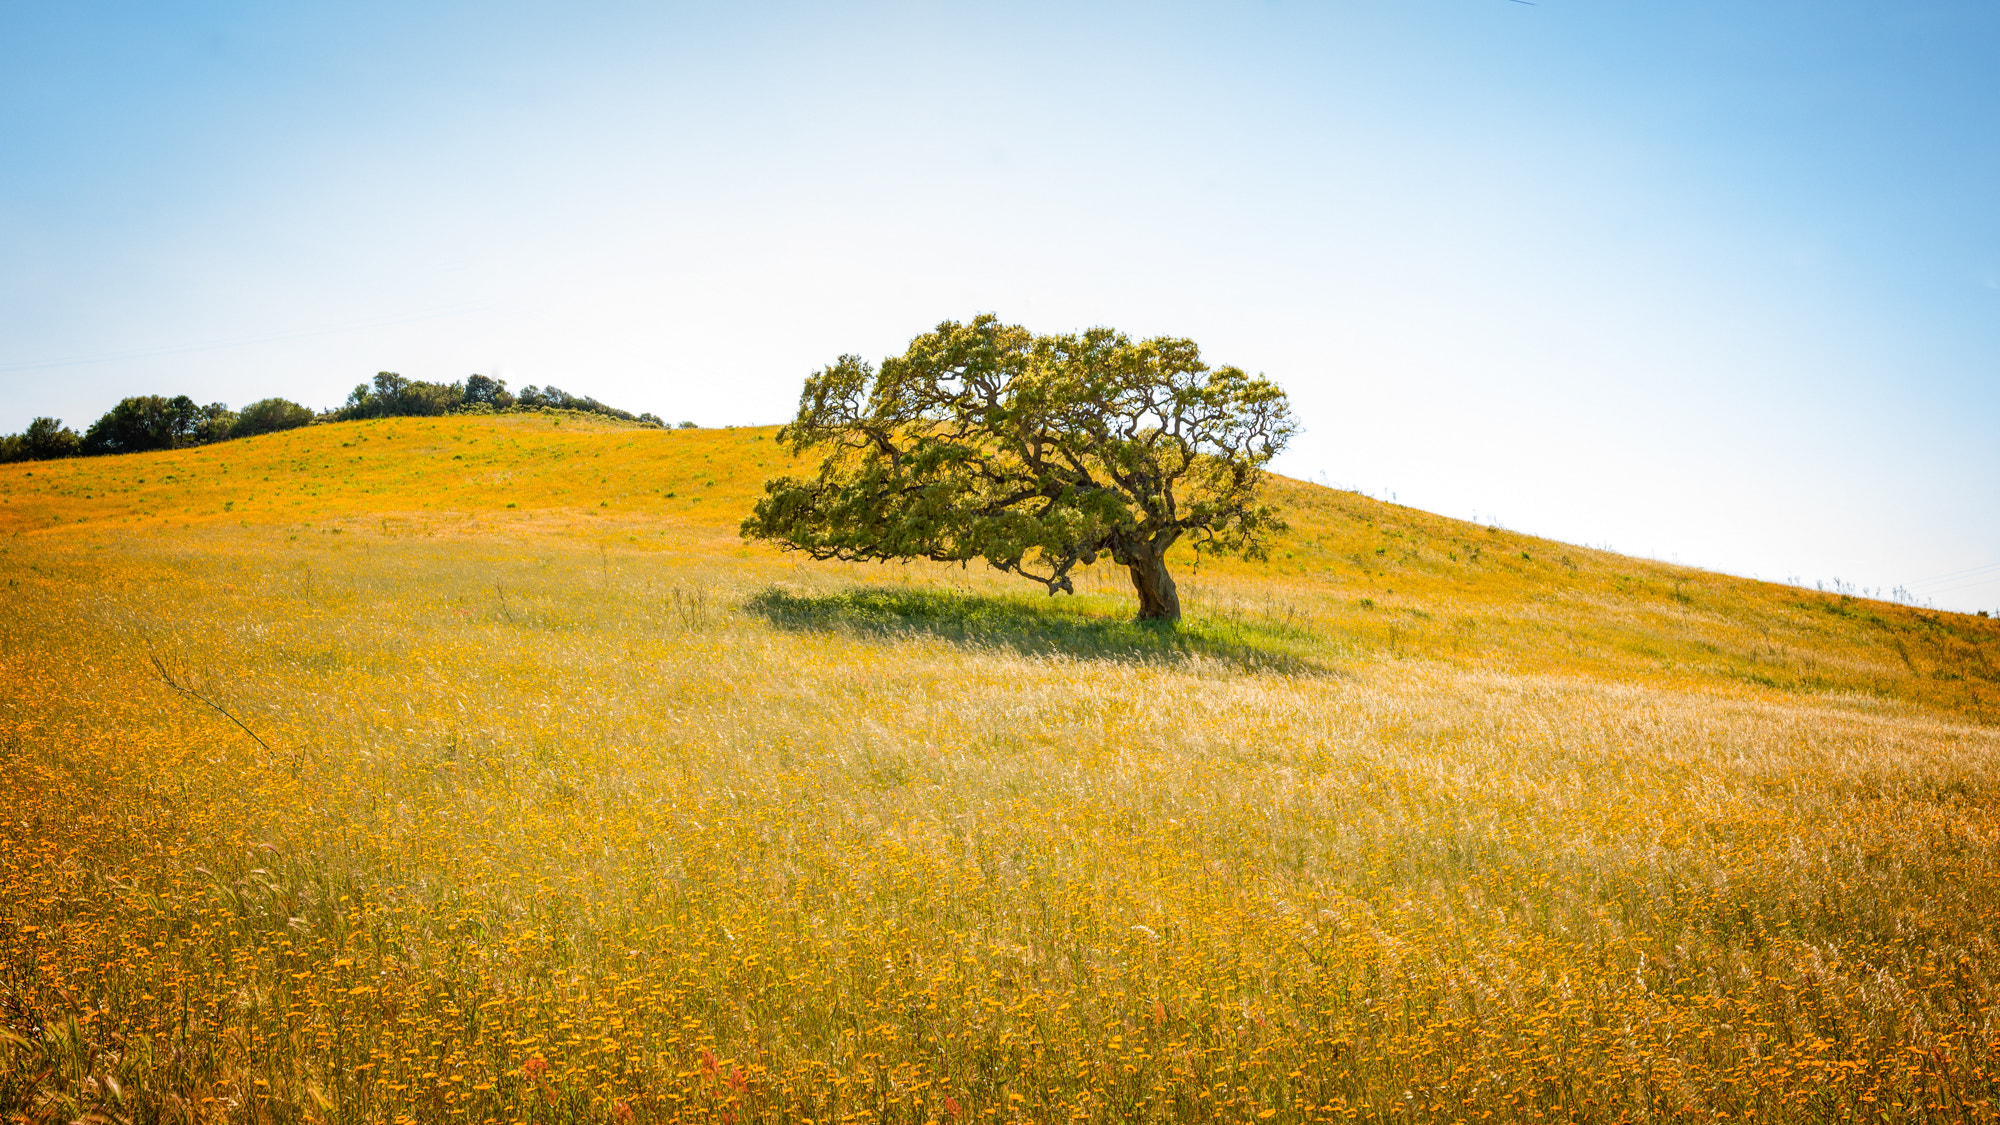 Hasselblad H4D sample photo. The lone tree photography